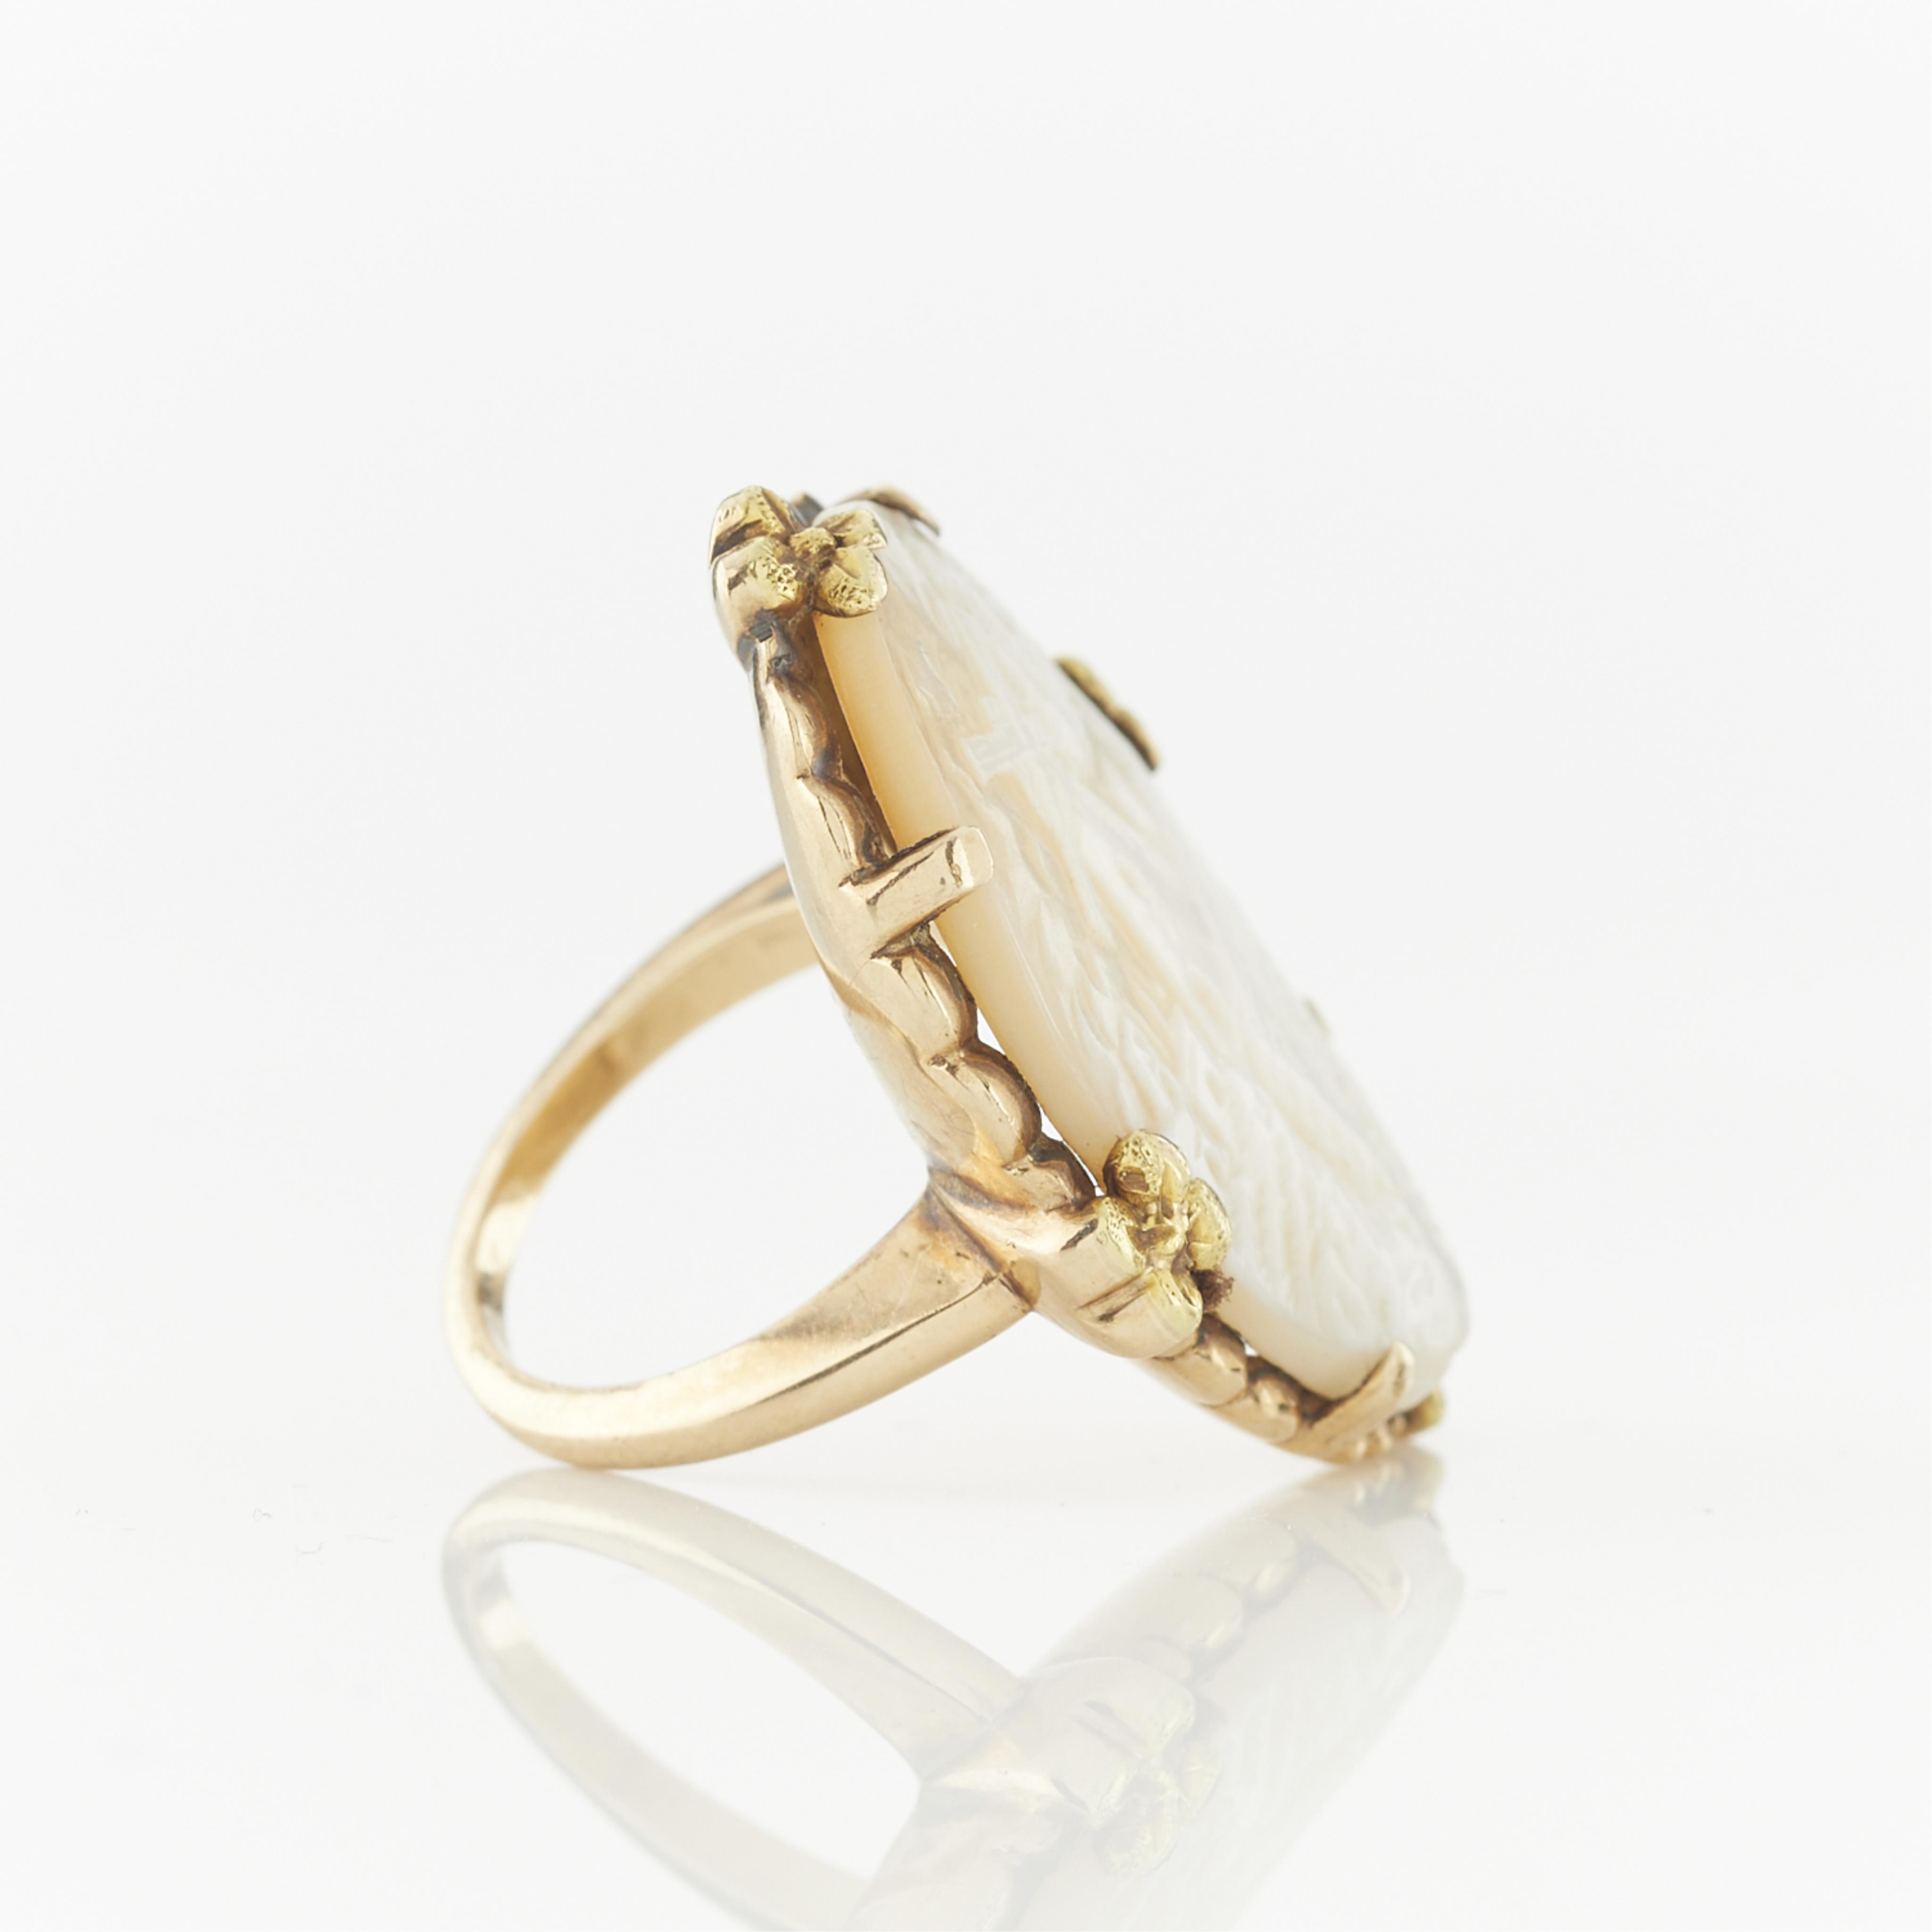 10k Yellow Gold Ring Set w/ Windmill Cameo - Image 7 of 9